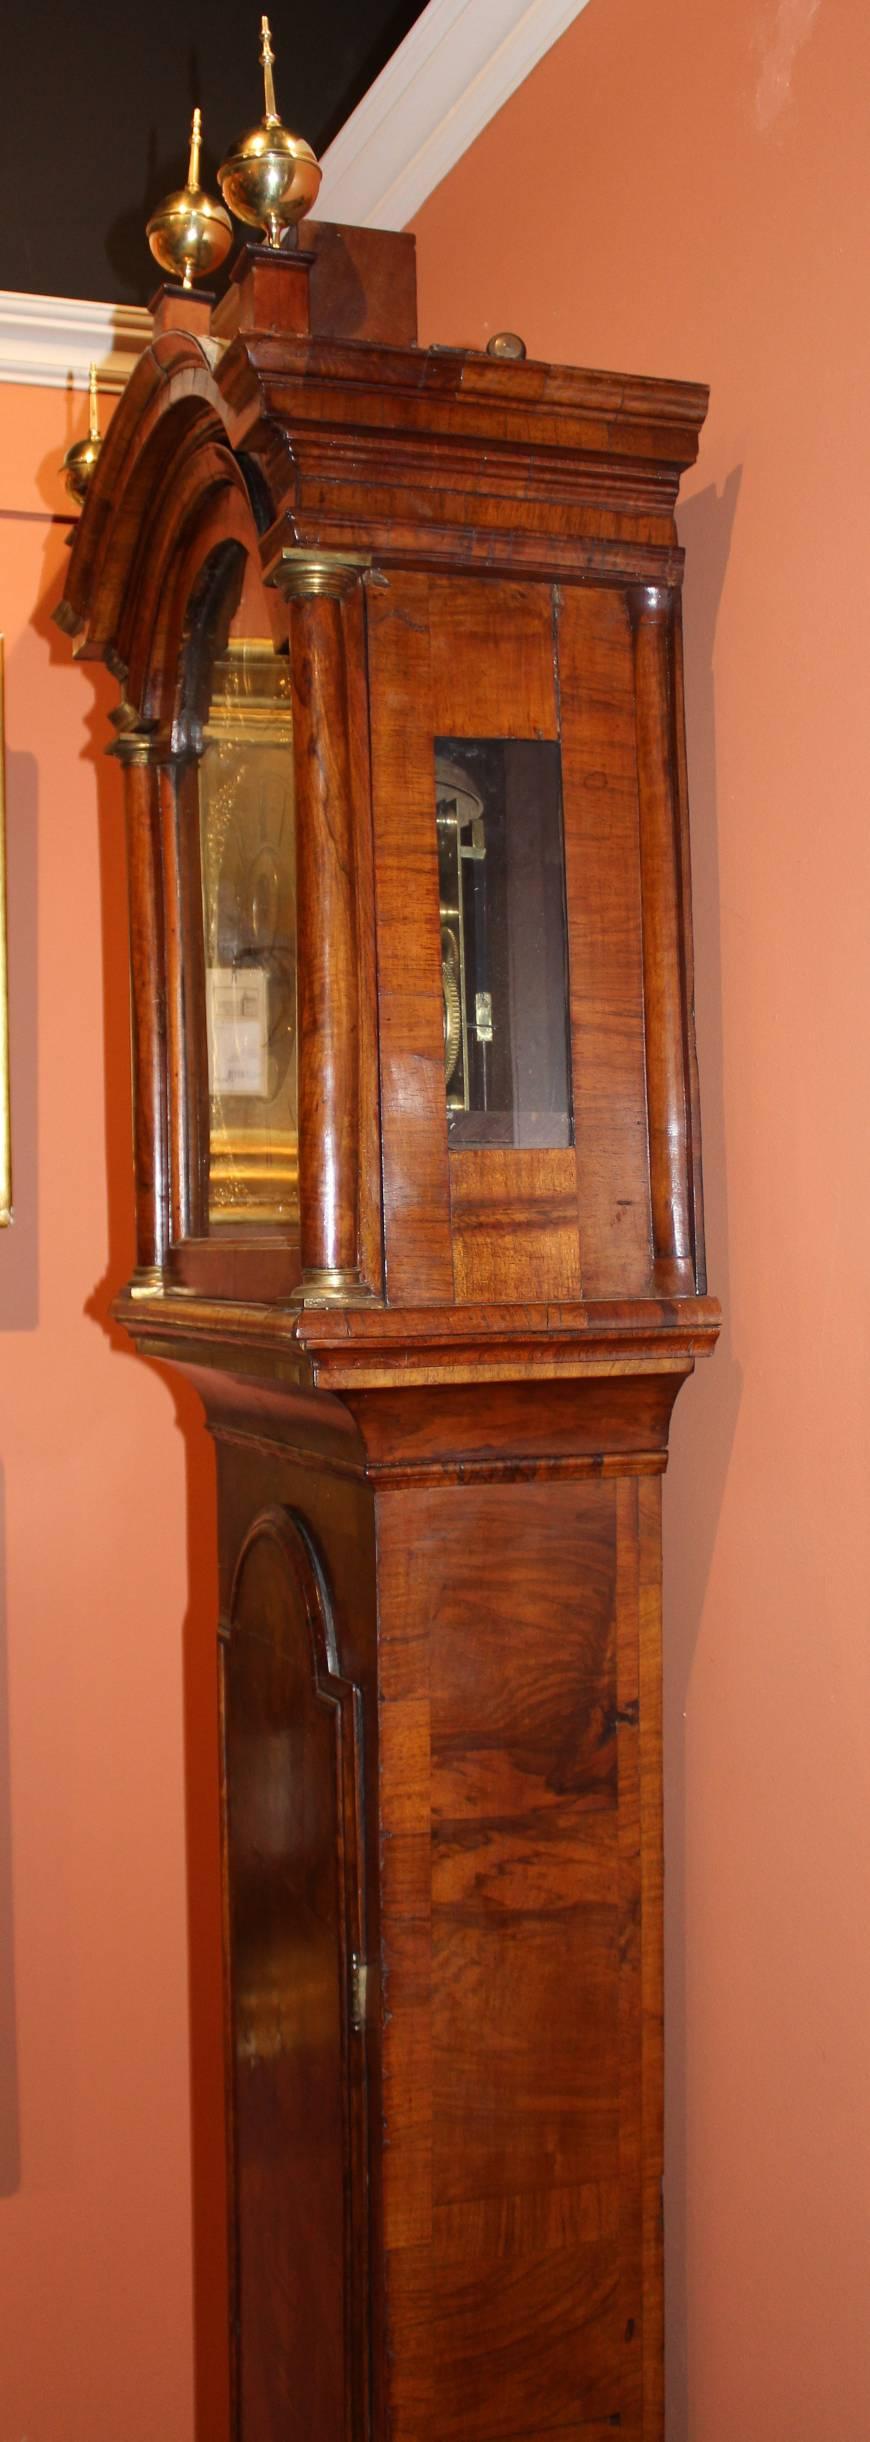 18th Century William Webster English Tall Case Clock with Rare 30 Day Movement, circa 1740